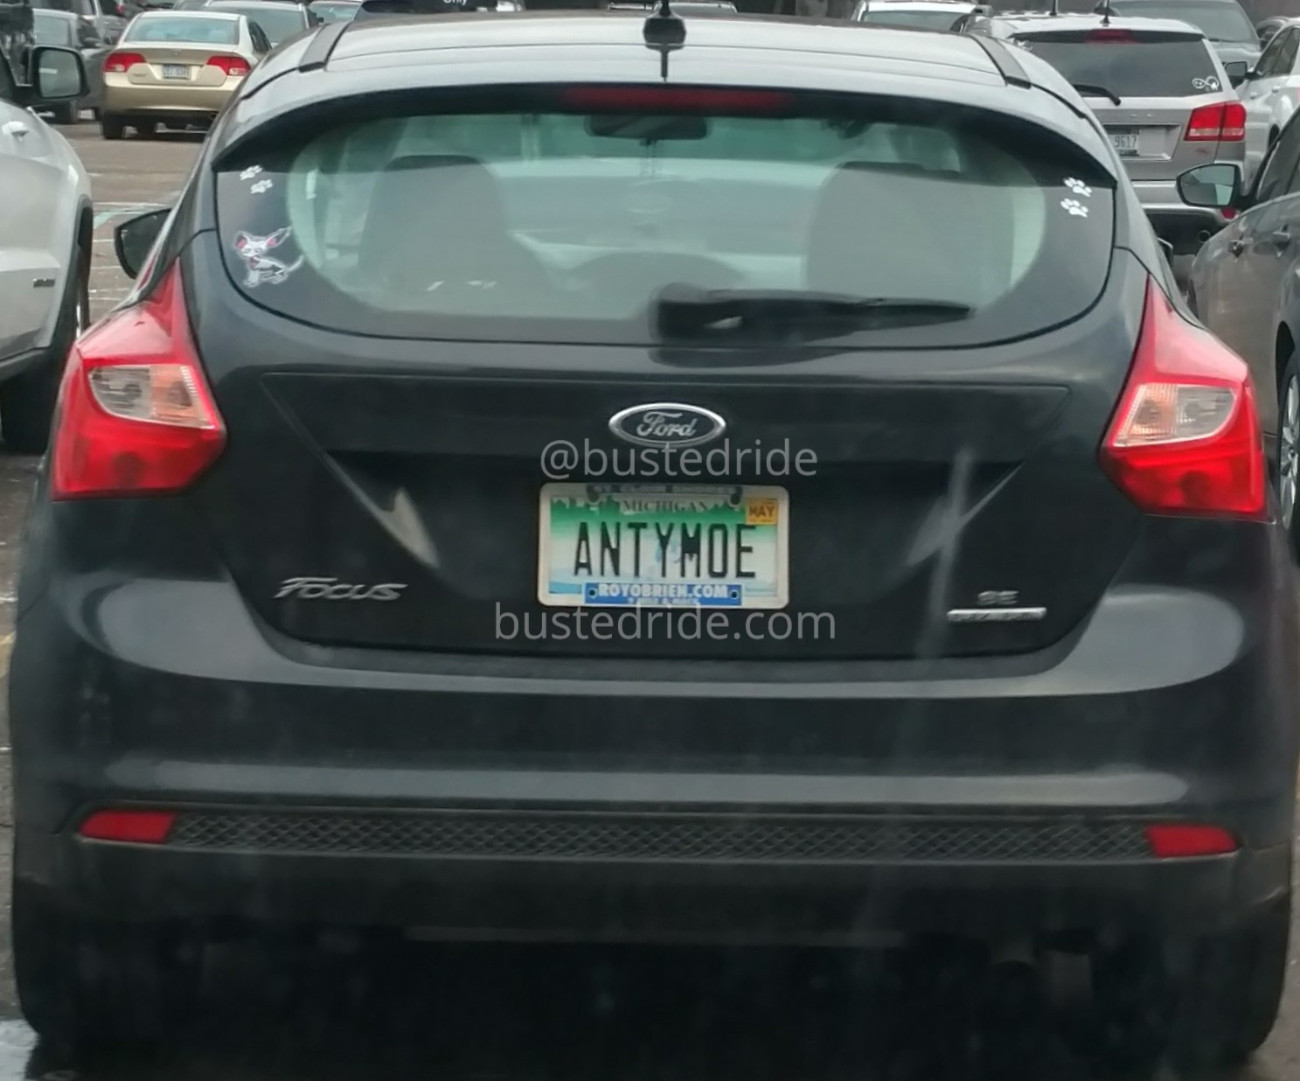 ANTYMOE - Vanity License Plate by Busted Ride